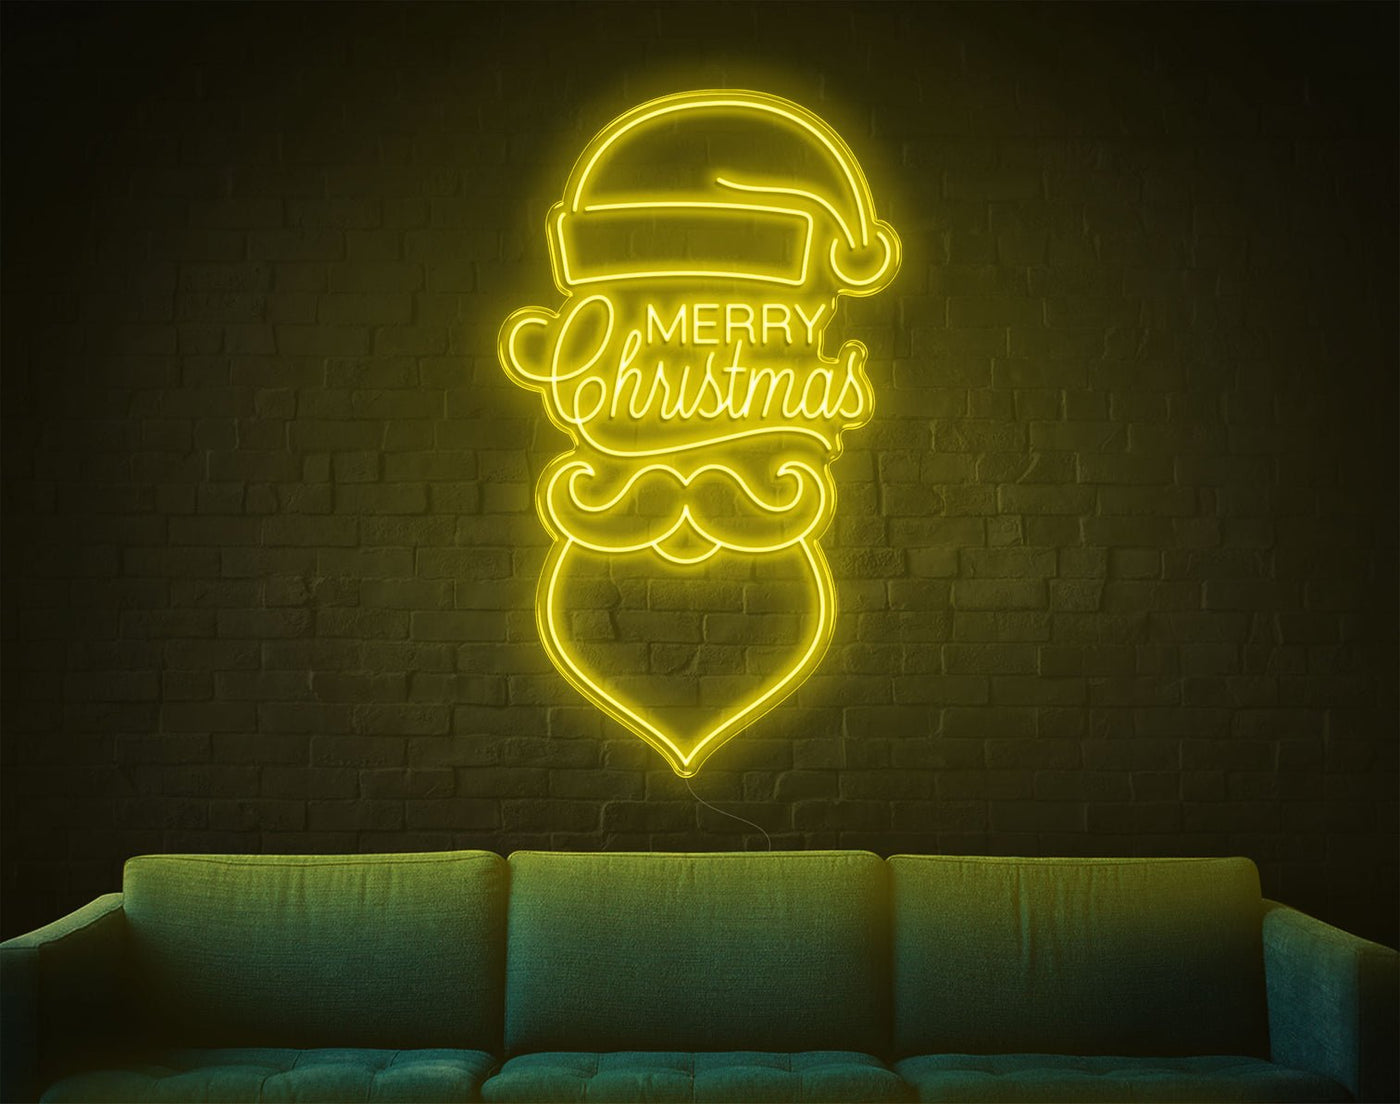 Merry Christmas V3 LED Neon Sign - 50inch x 30inchHot Pink